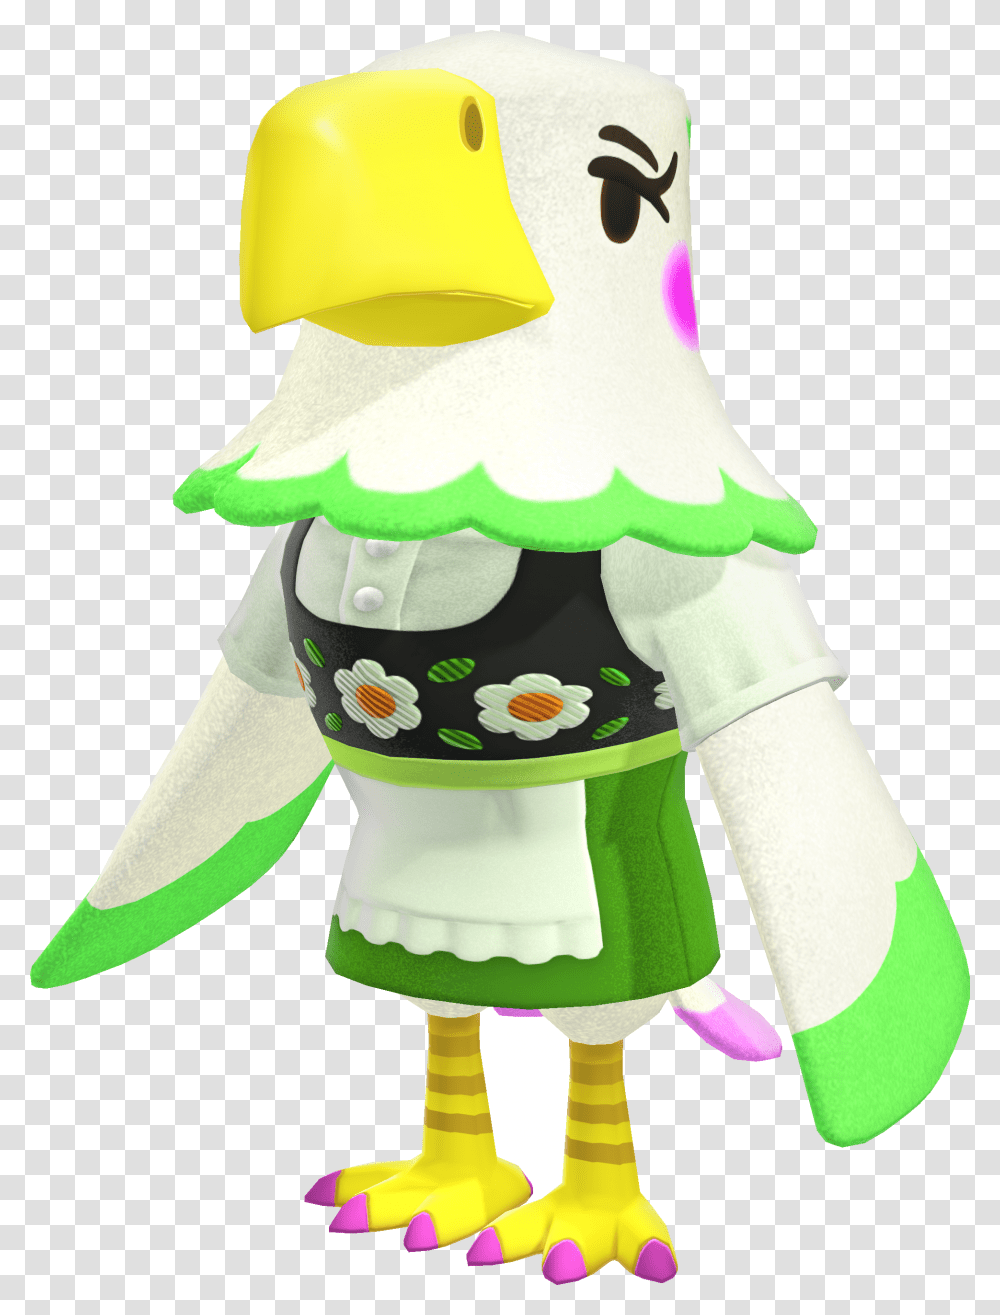 Eagle Villagers Animal Crossing, Toy, Nutcracker, Doll Transparent Png